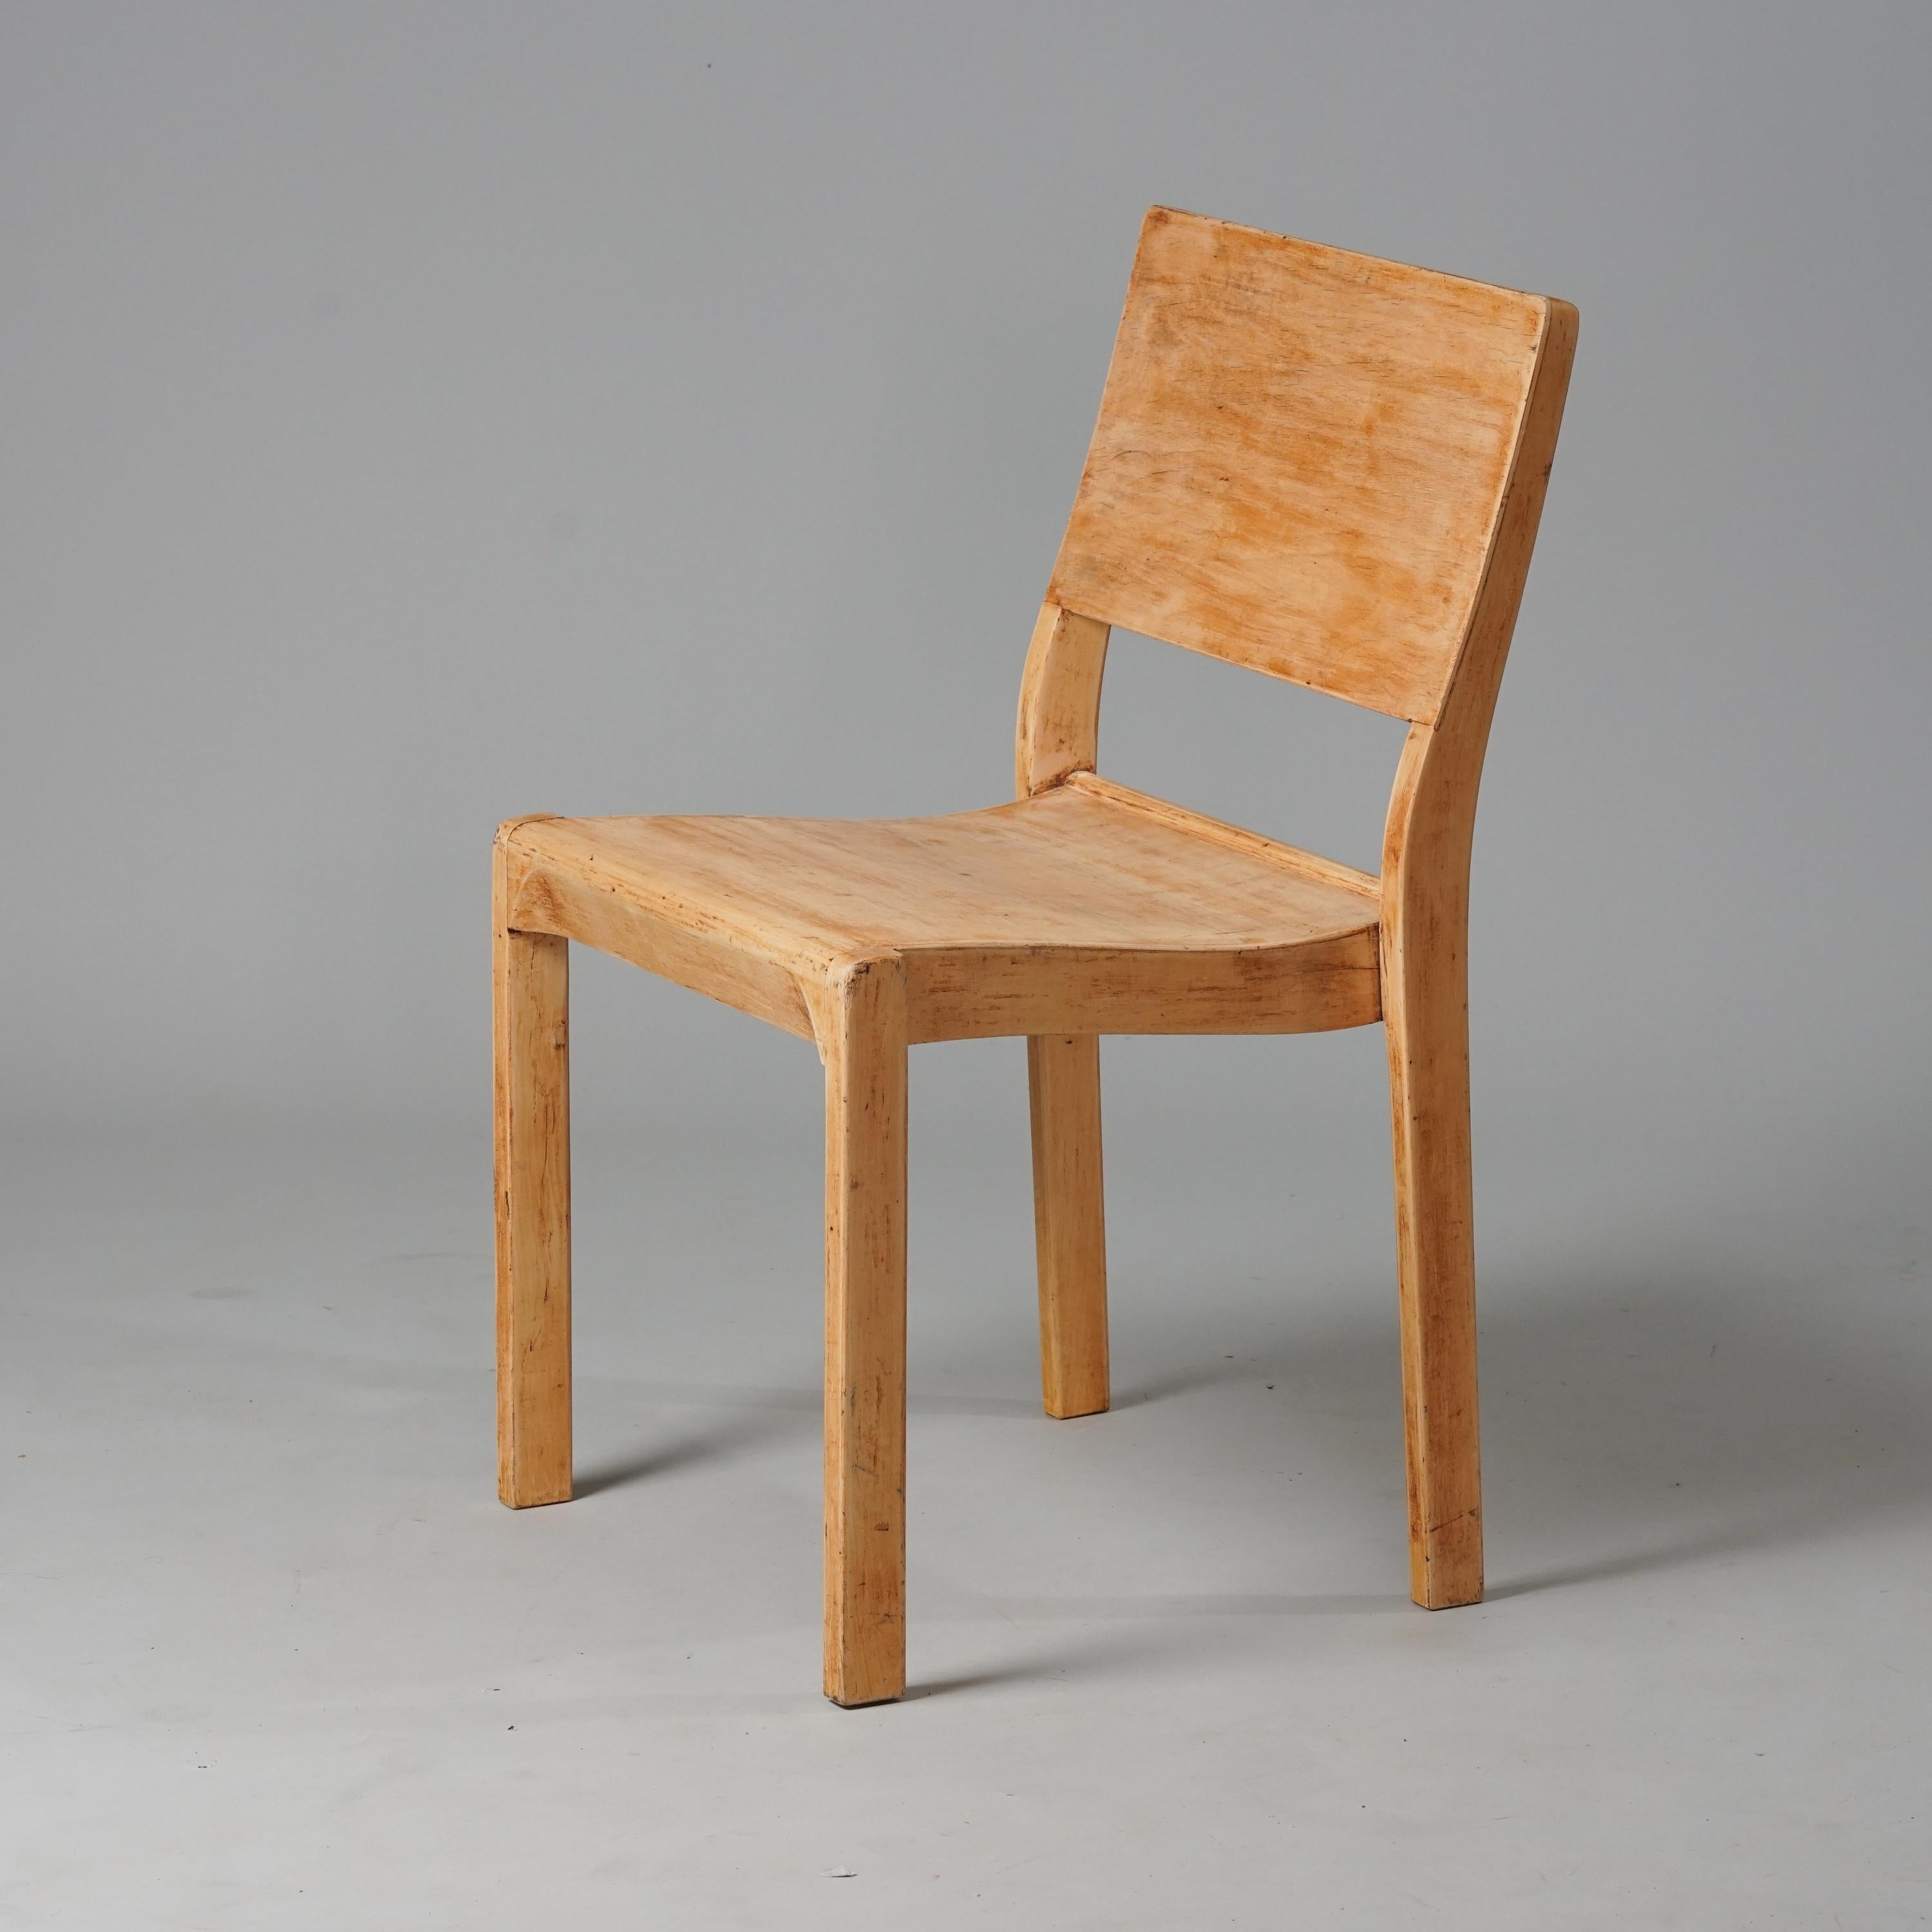 Early Model 611 chair, designed by Alvar Aalto, manufactured by Oy Huonekalu- ja Rakennustyötehdas Ab, 1930s. Patinated birch. Natural surface. Good vintage condition, patina consistent with age and use. 

Alvar Aalto (1898-1976) is probably the